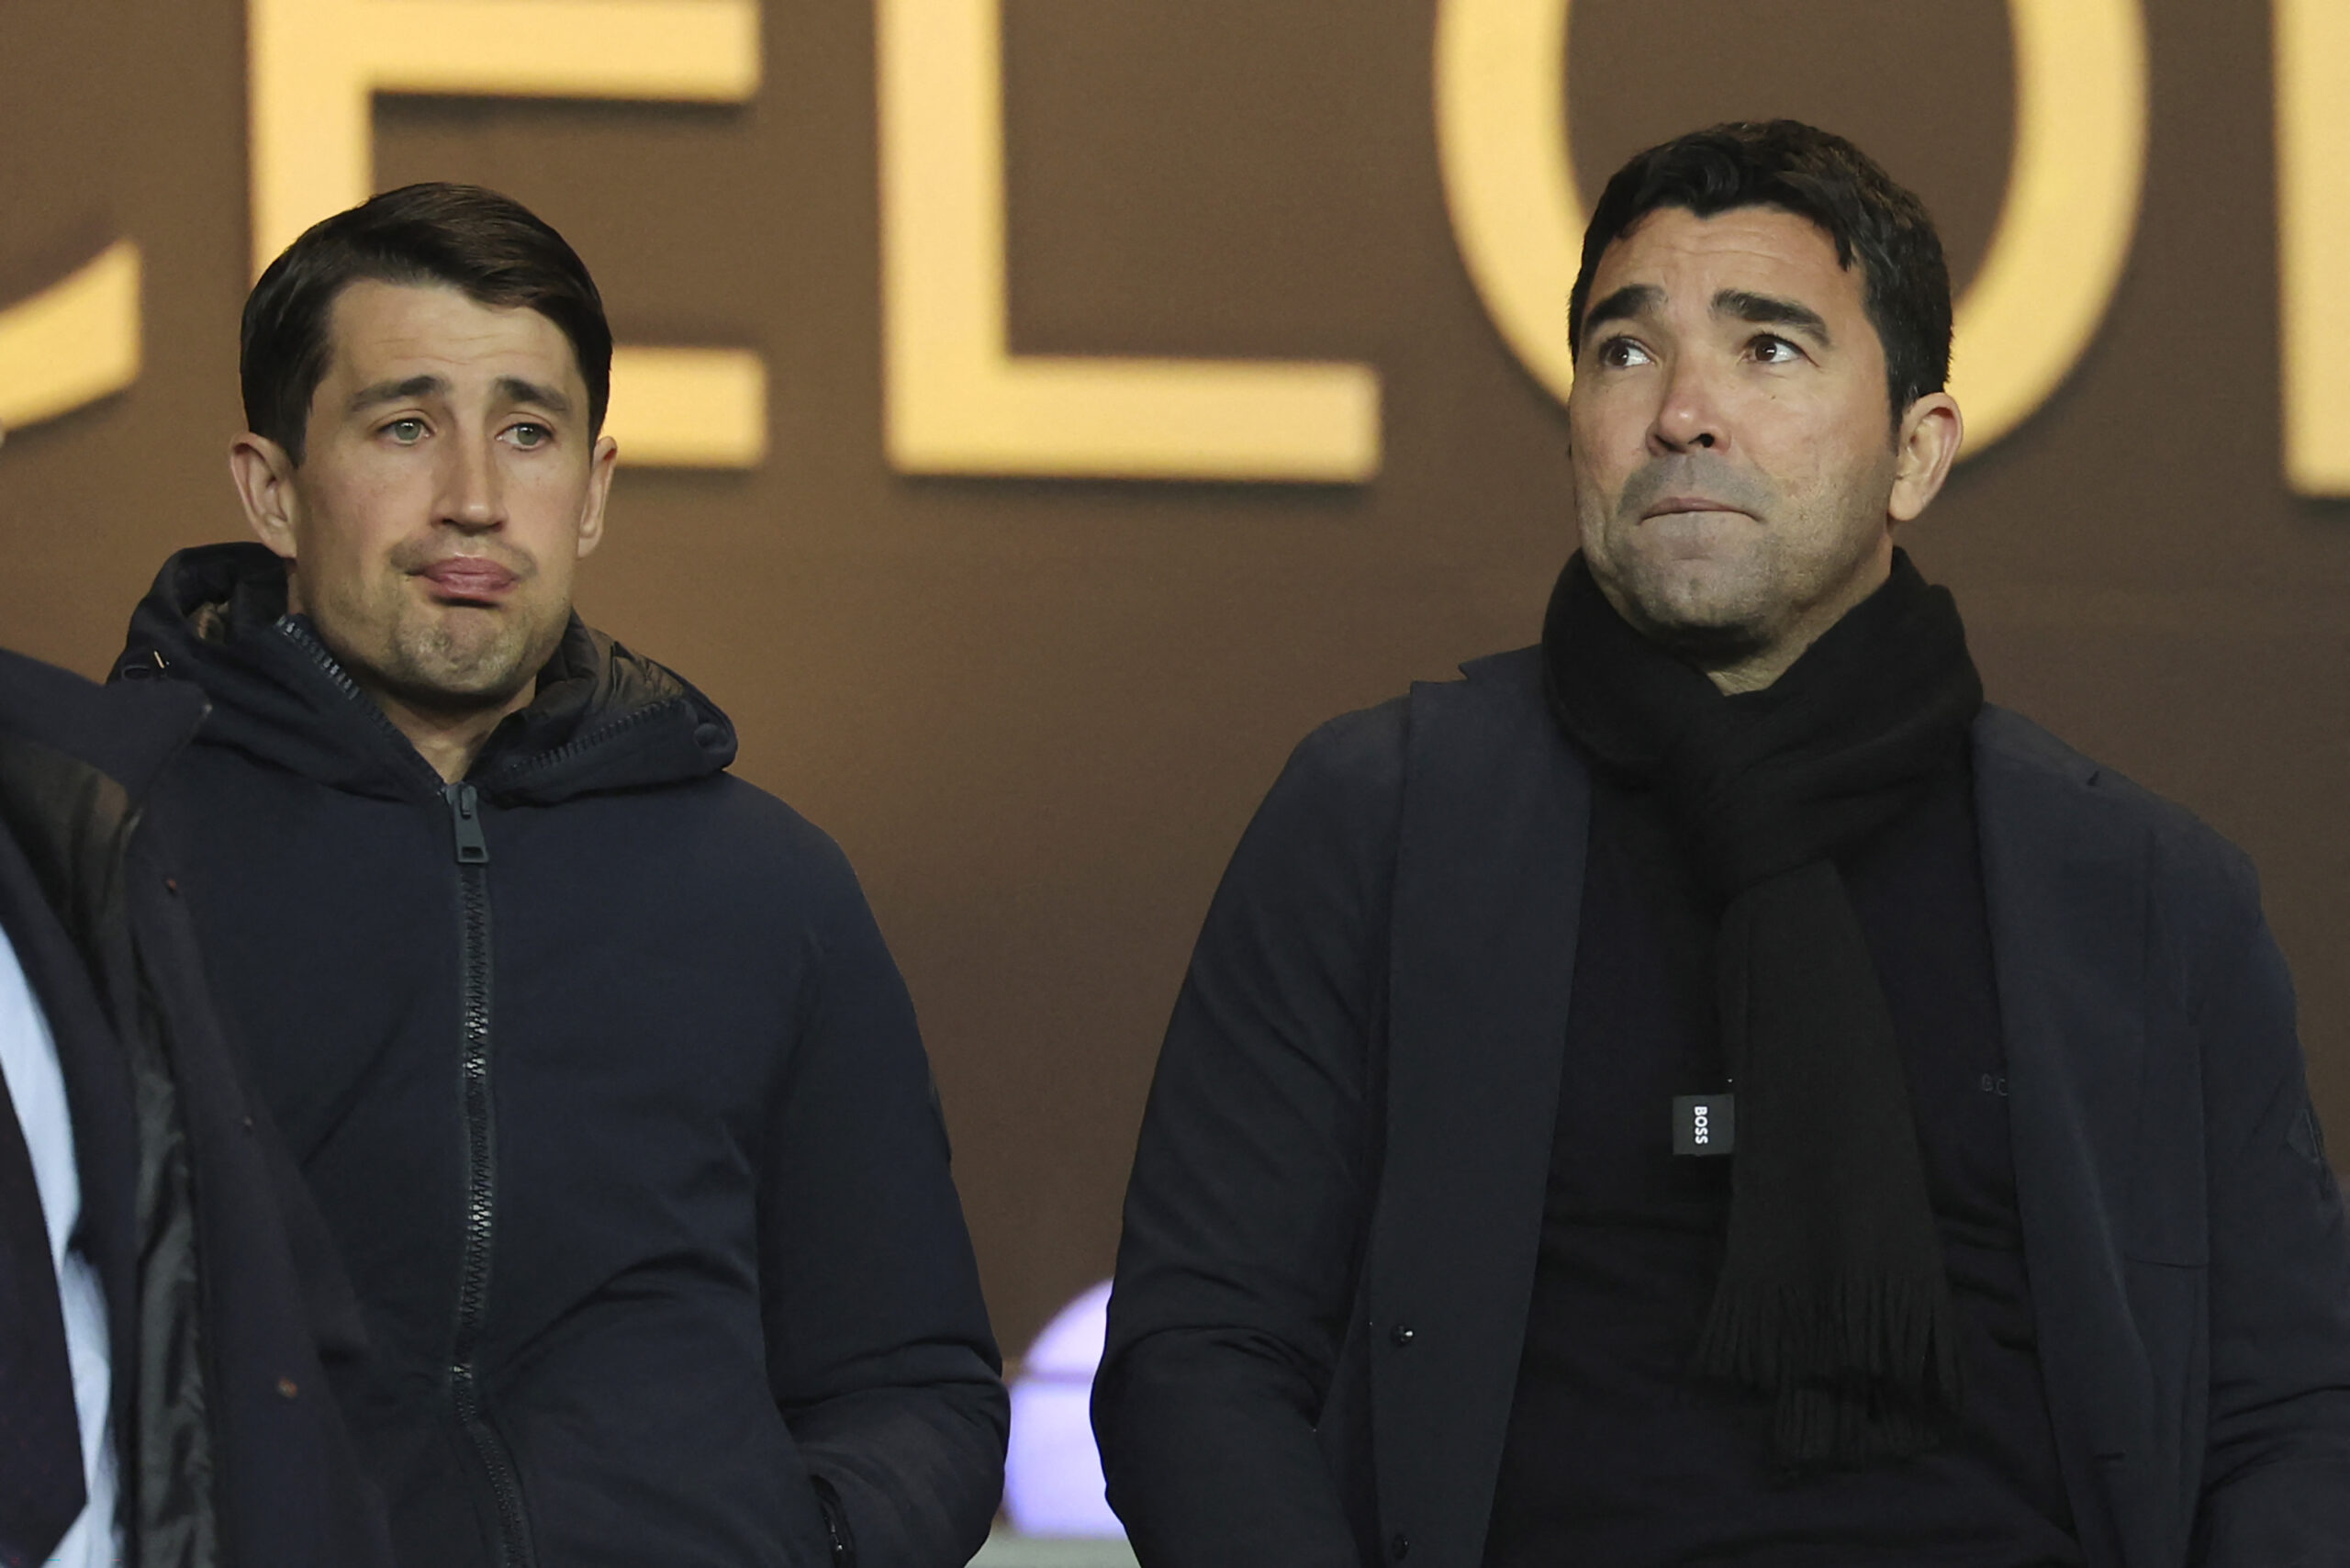 Former footballer Bojan Krkic (L) and Barcelona's Sports Director Anderson de Souza Deco wait for the start of the the Spanish league football match between FC Barcelona and CA Osasuna at the Estadi Olimpic Lluis Companys in Barcelona on January 31, 2024.